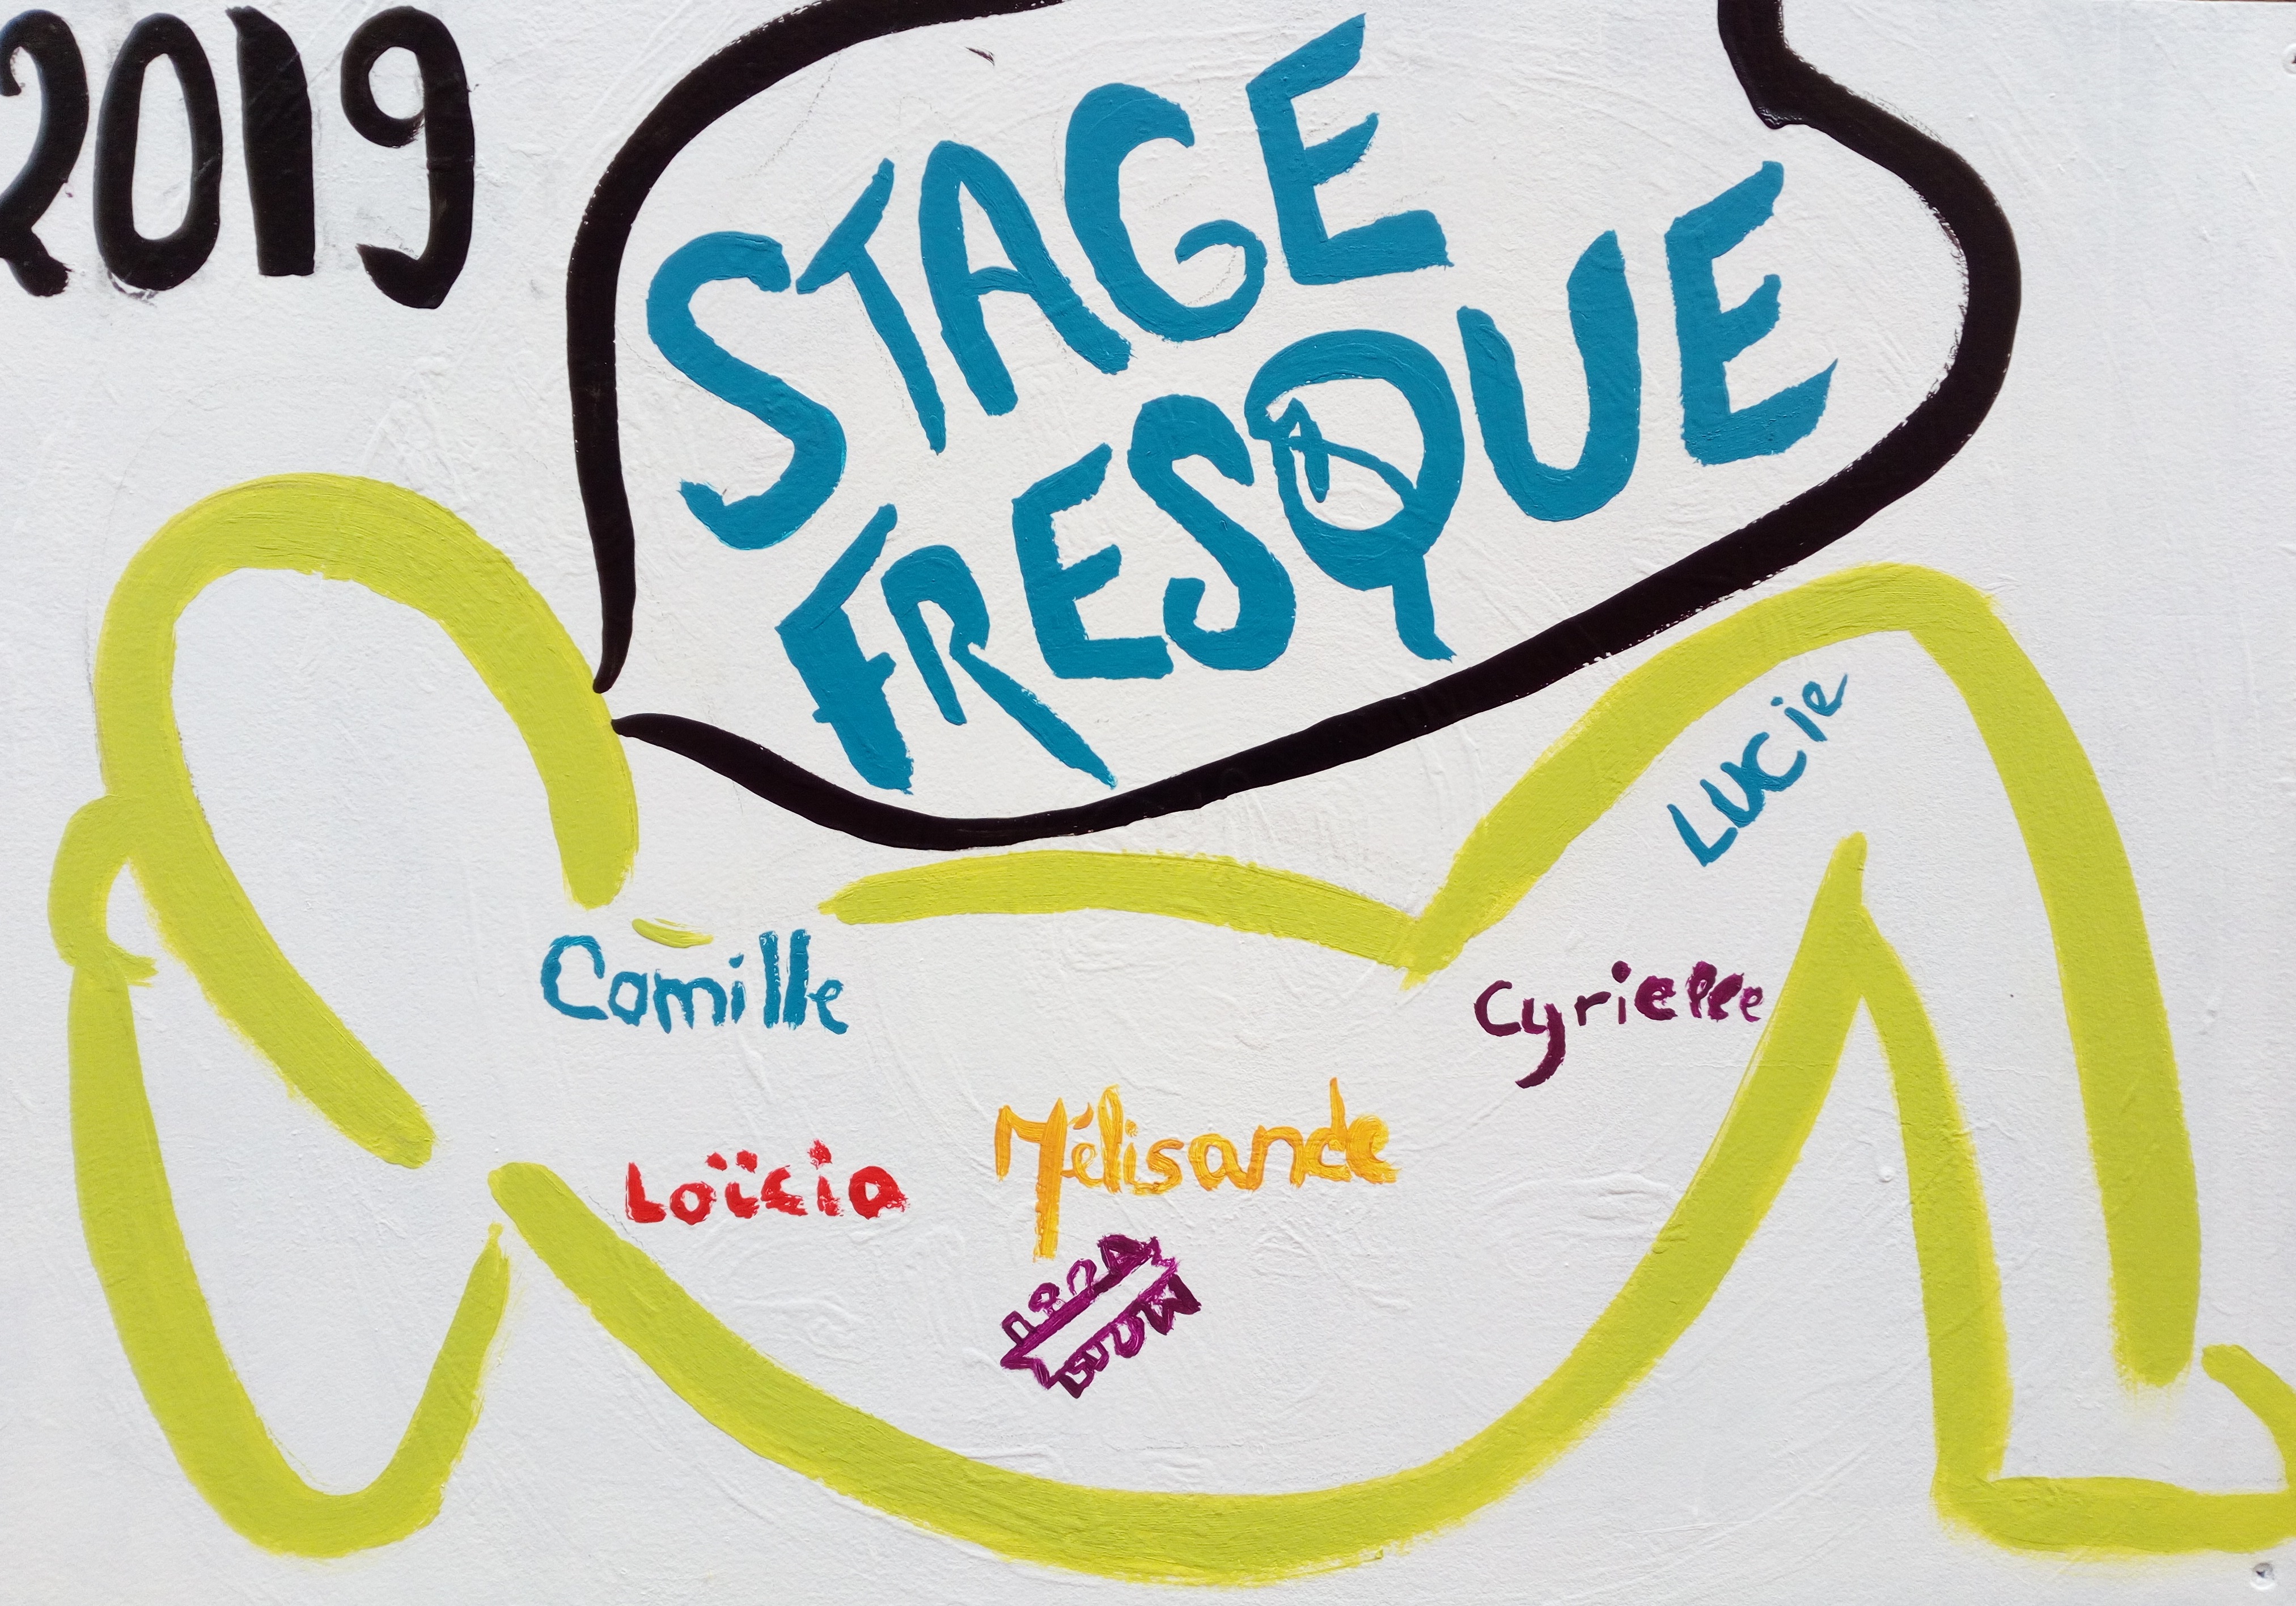 You are currently viewing News du stage fresque 2019